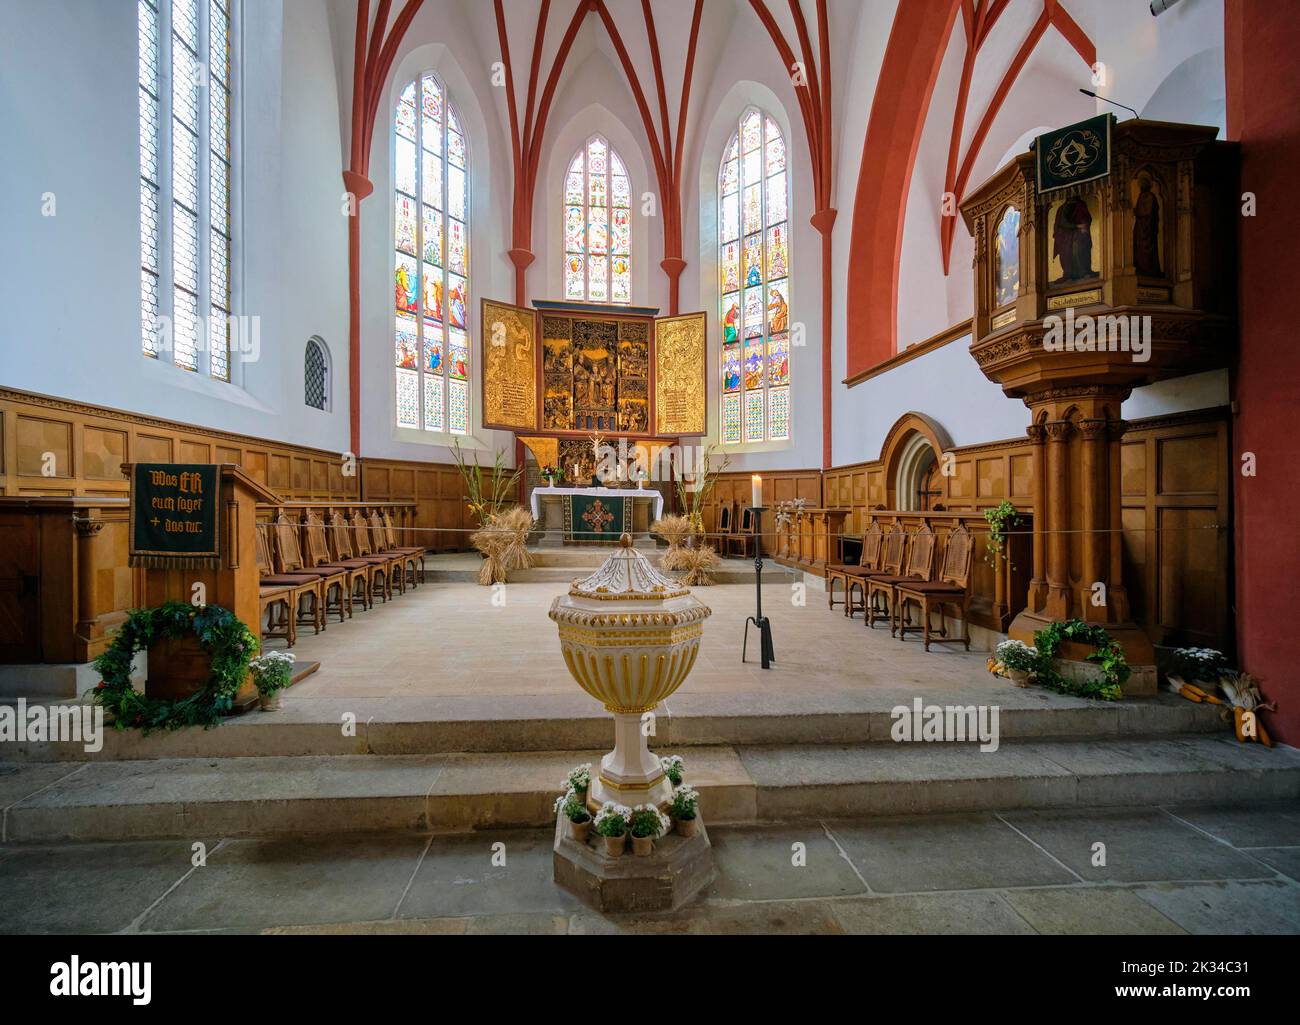 Late Gothic Church of Our Lady with carved altar c. 1500, interior view, Meissen, Saxony, Germany Stock Photo